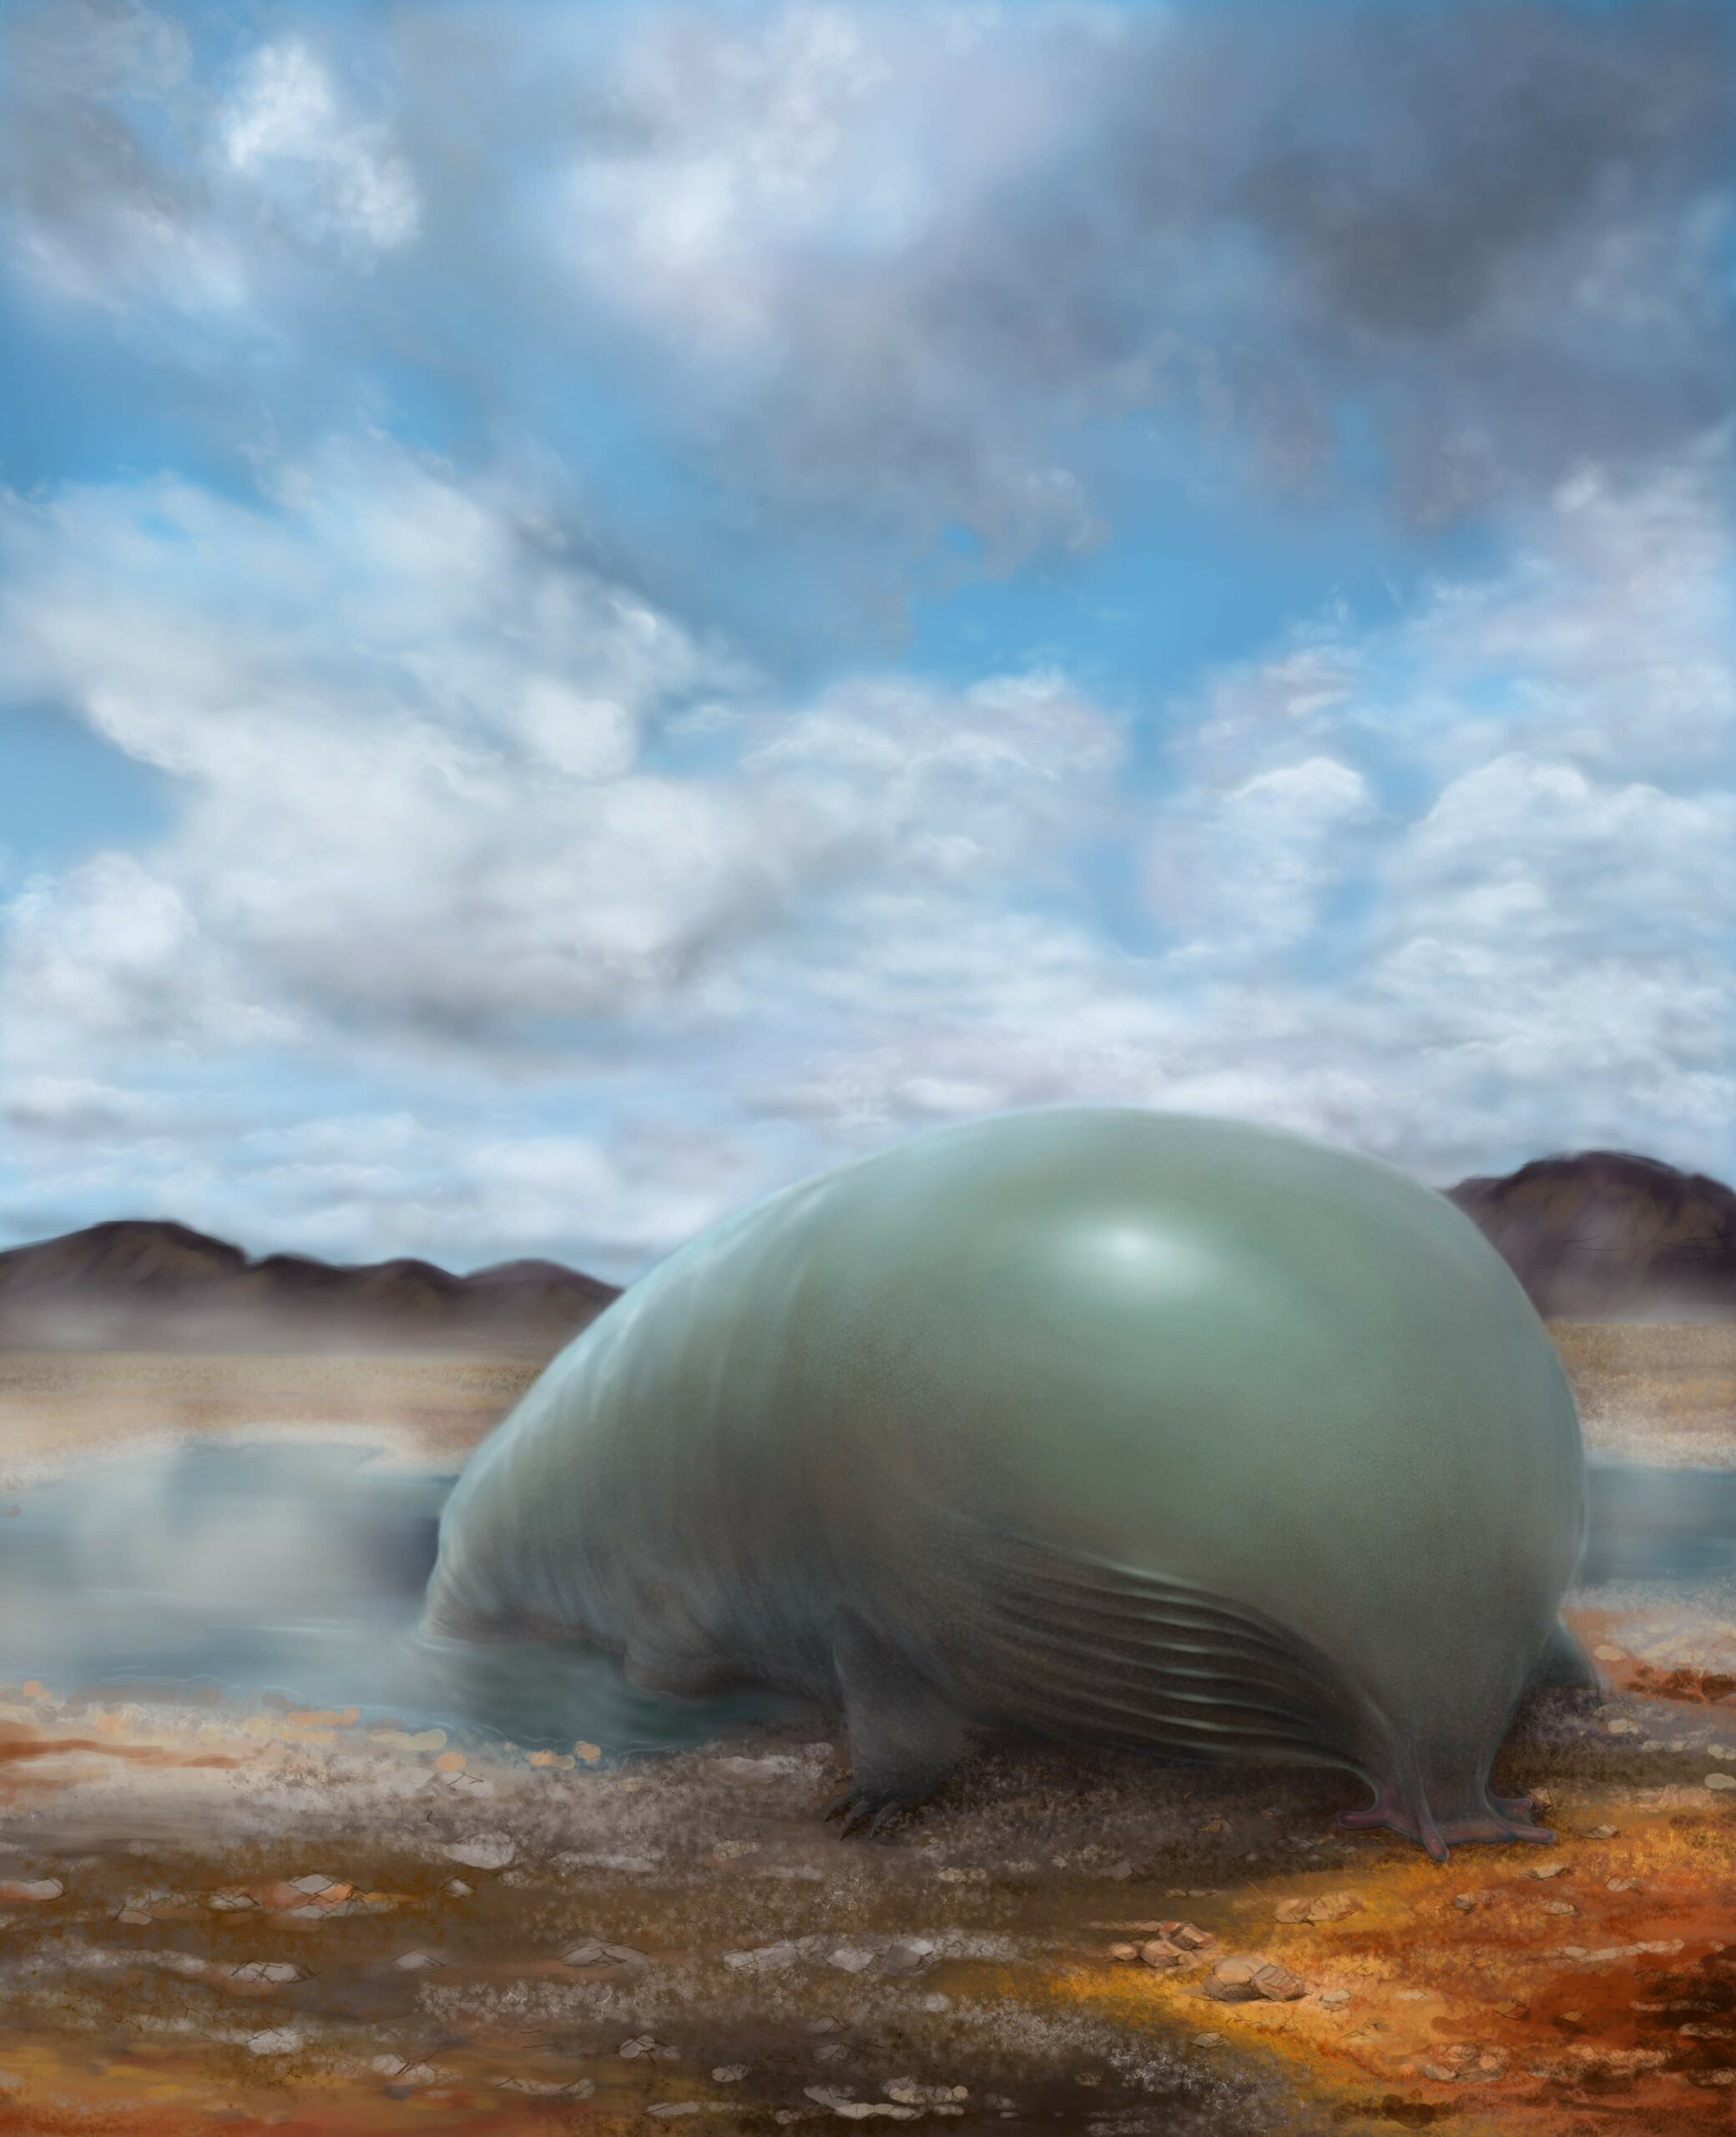 Looking for silicon-based alien life? Don’t hold your breath.